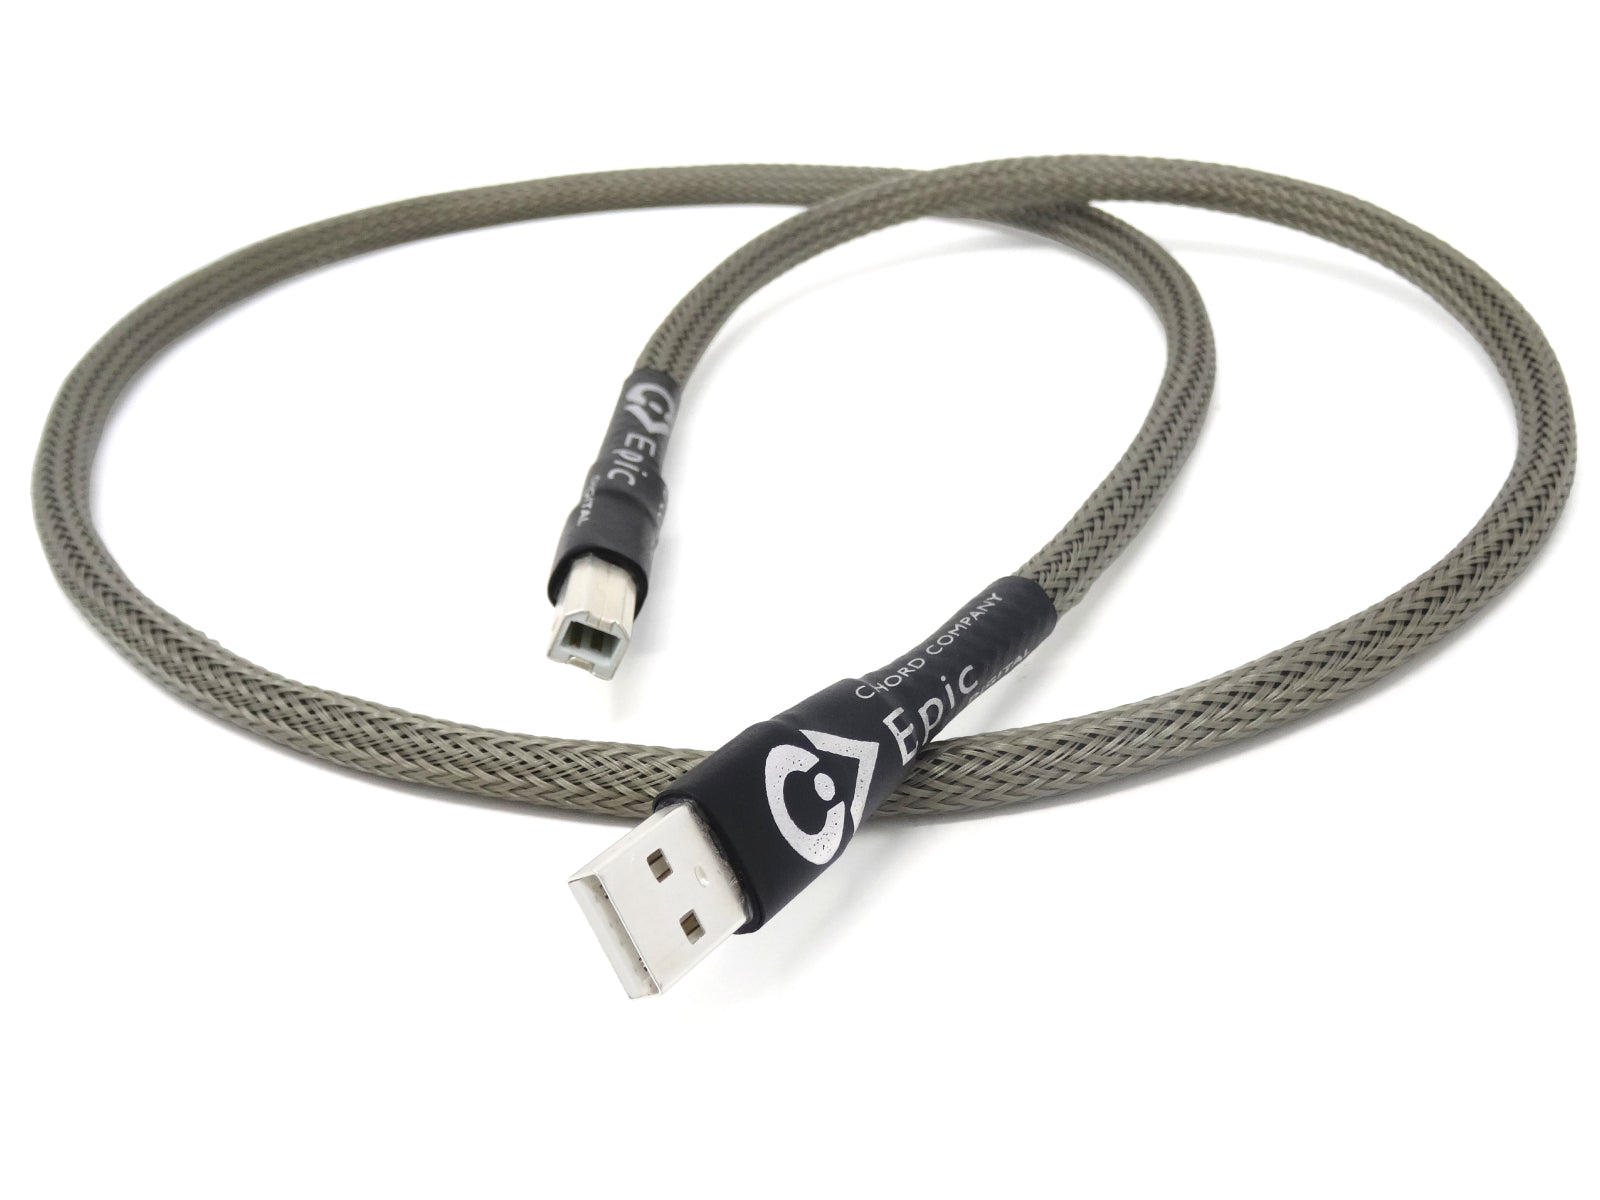 Chord Epic USB (ChorAlloy plated)